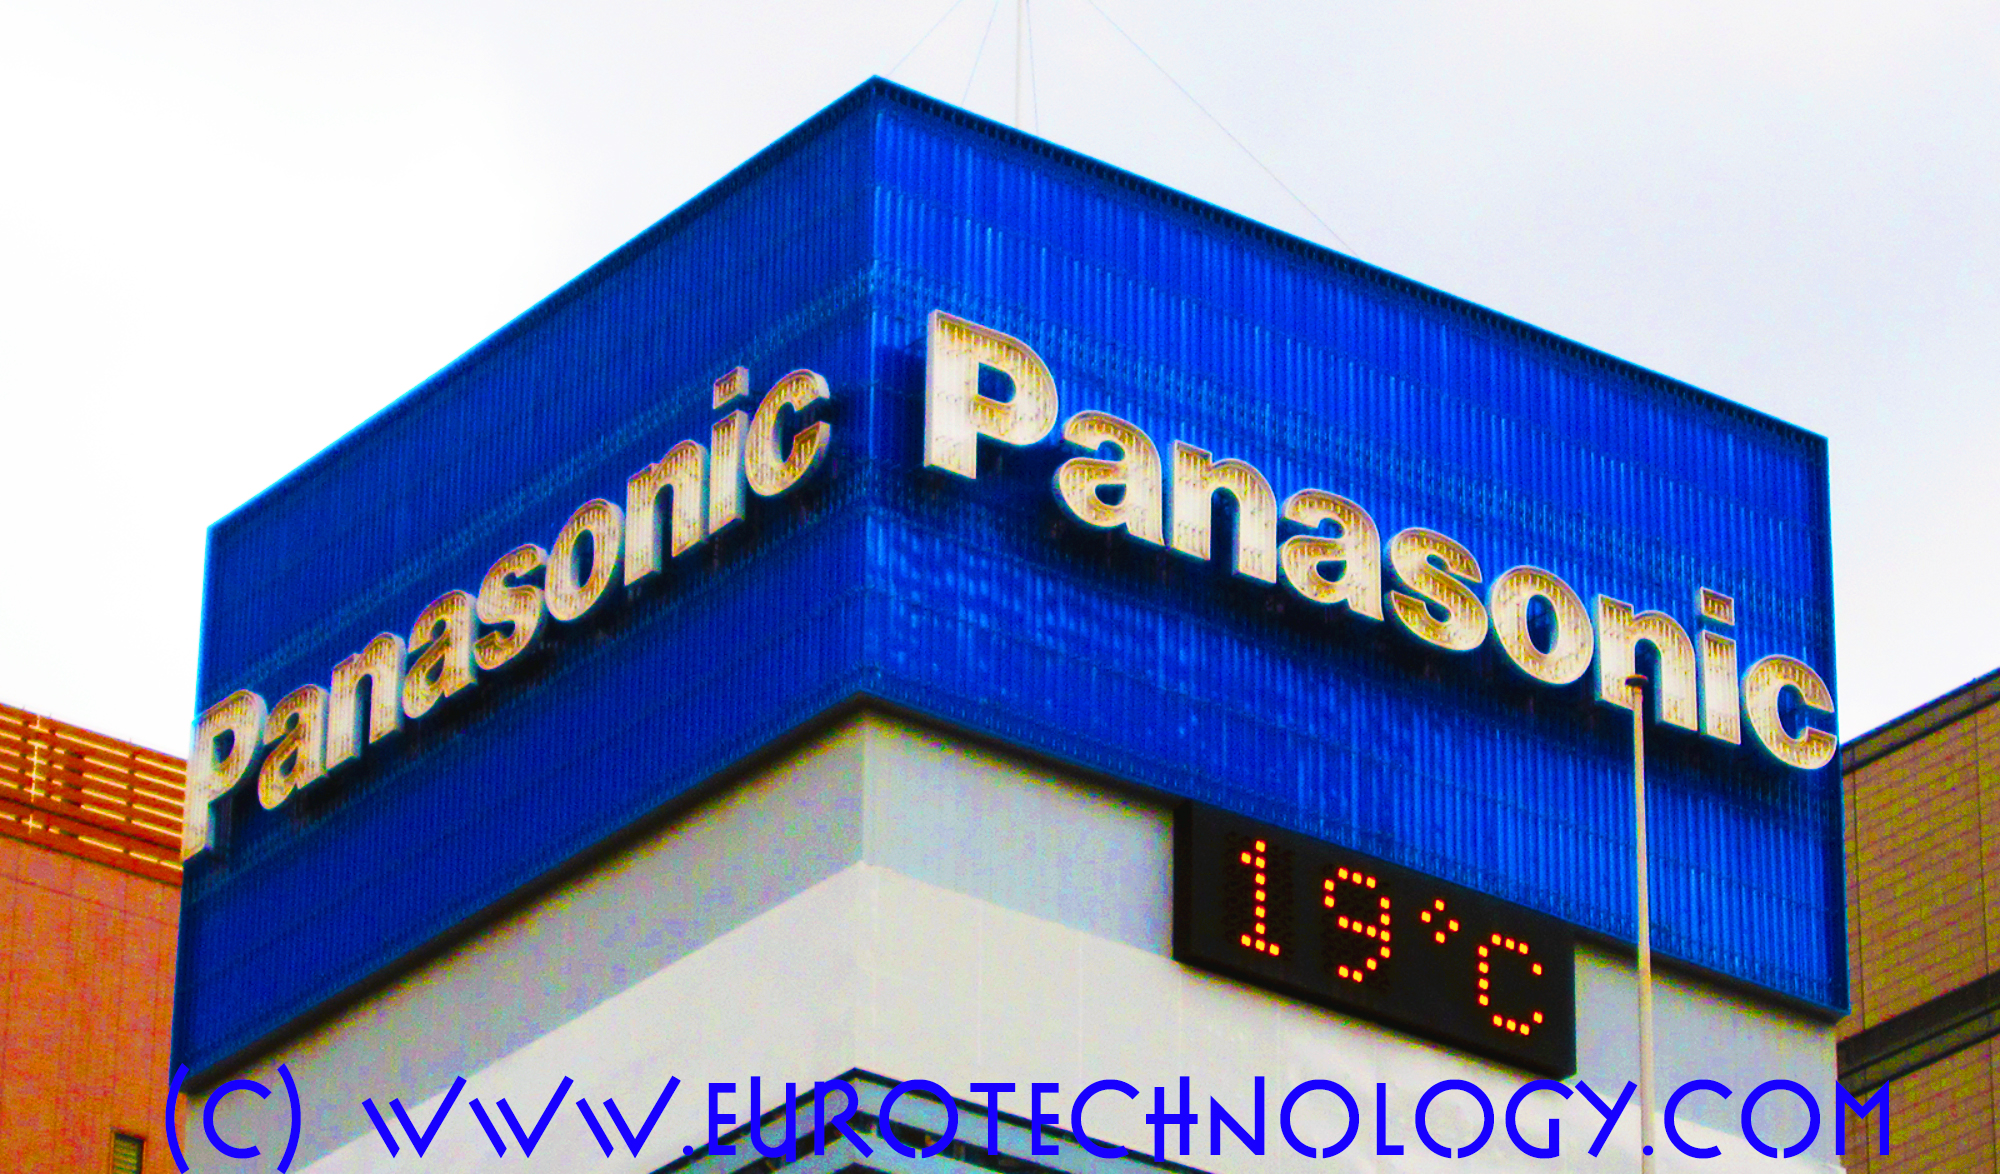 Nokia to buy Panasonic’s mobile phone base station division